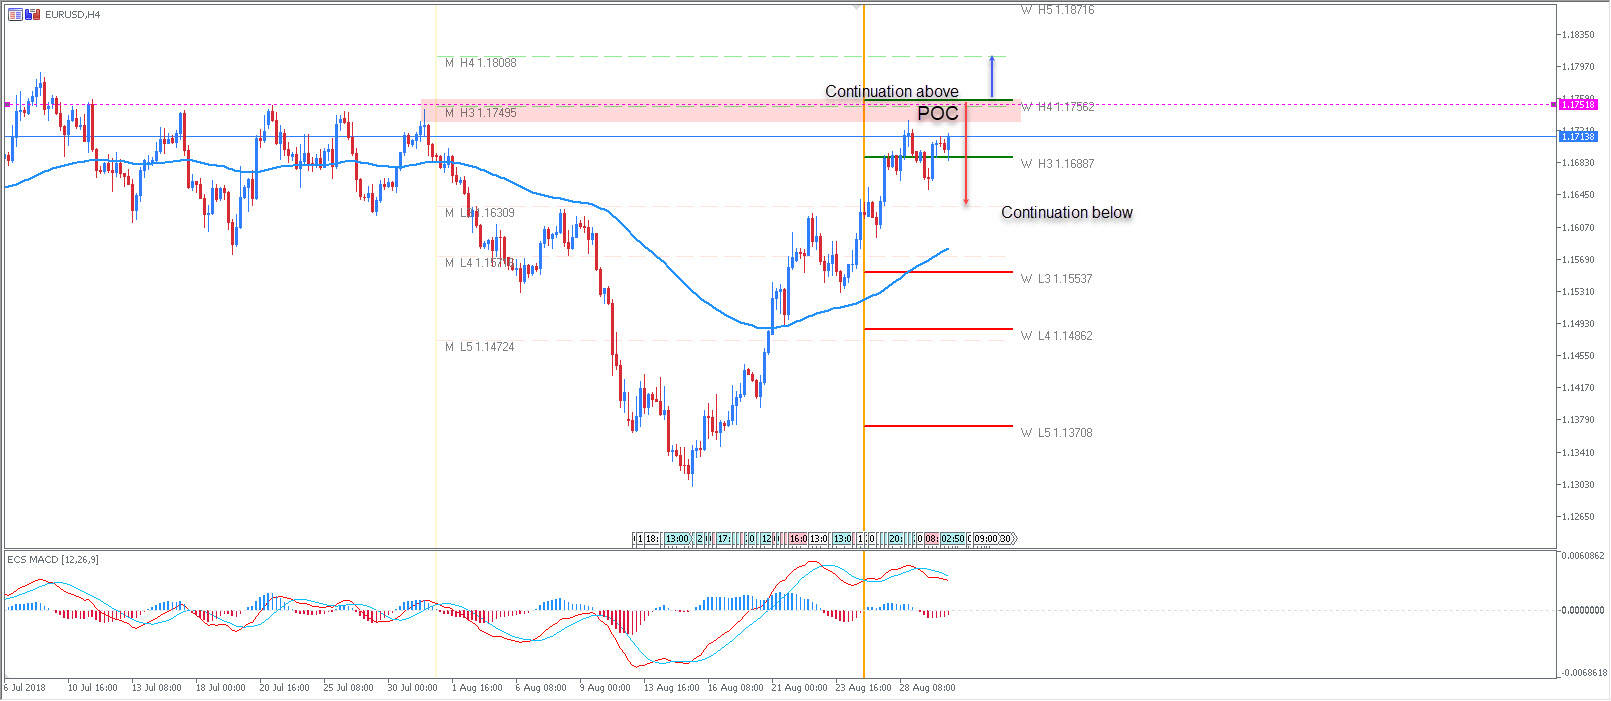 EUR/USD is Bullish but Close to Strong Resistance